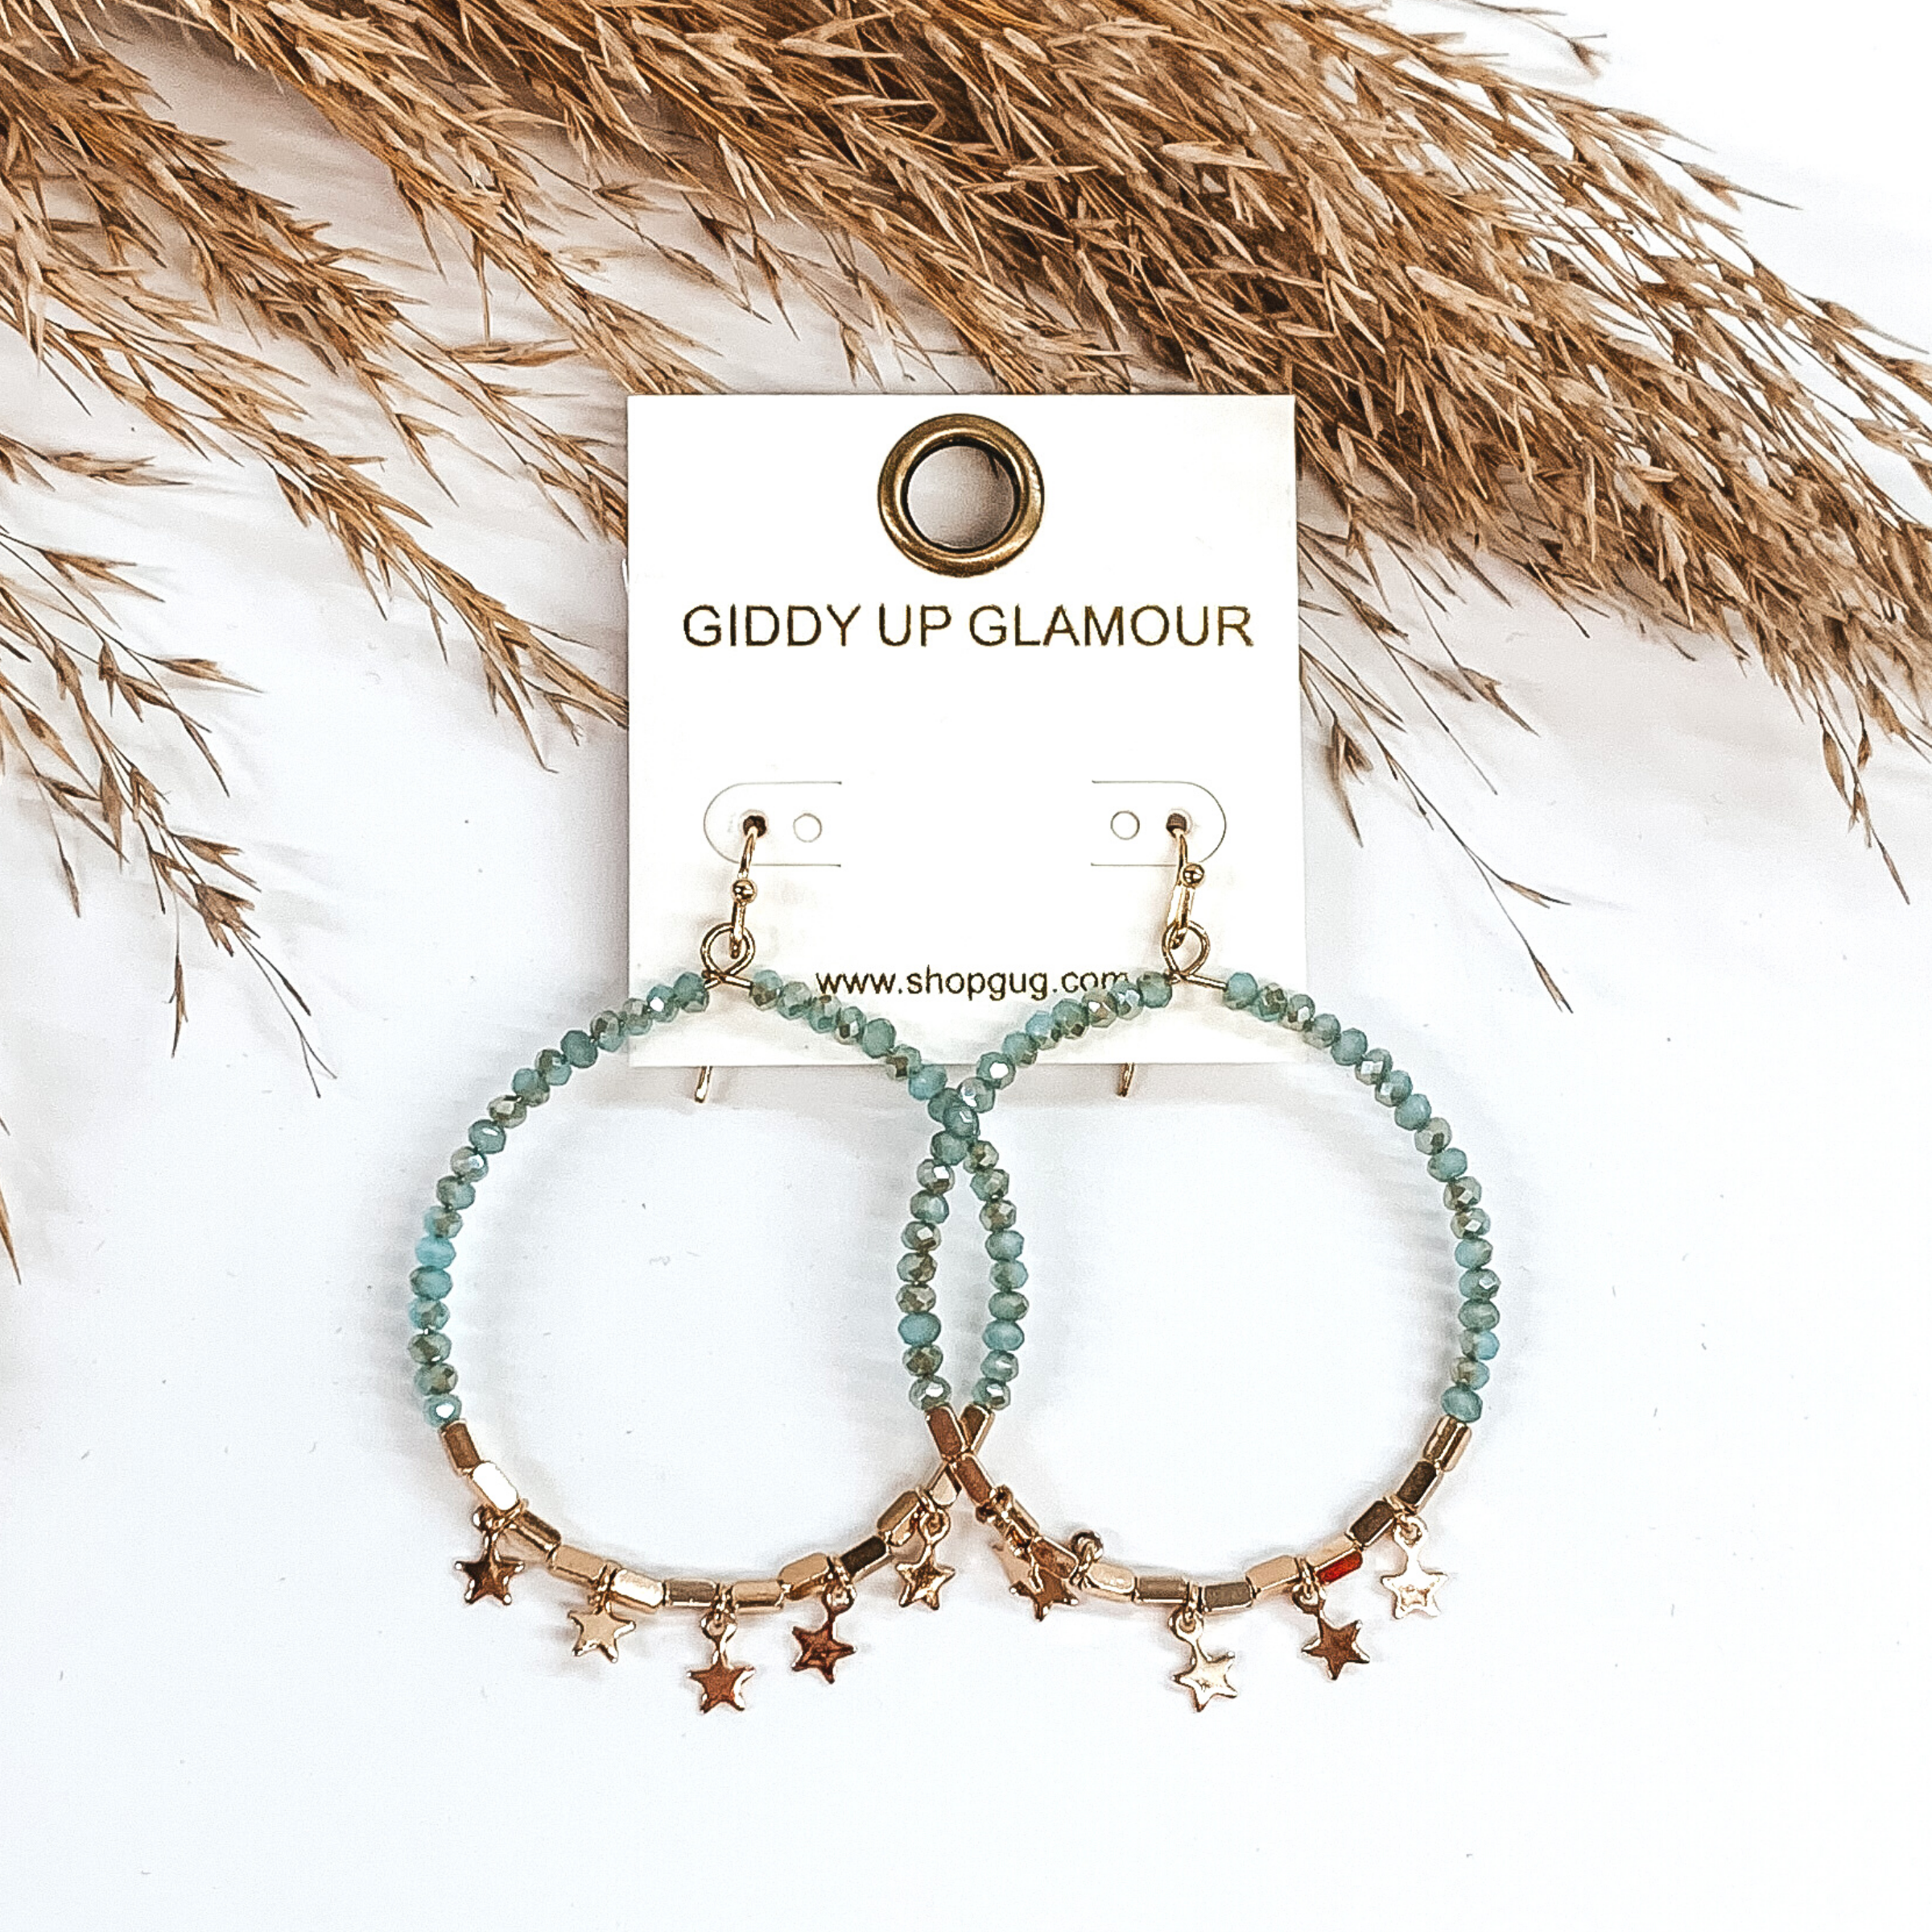 These earrings are a circle drop earrings covered half in turquoise beads and the bottom part has gold beads with tiny gold star charms. These earrings are pictured on a white background with tan floral at the top of the picture. 